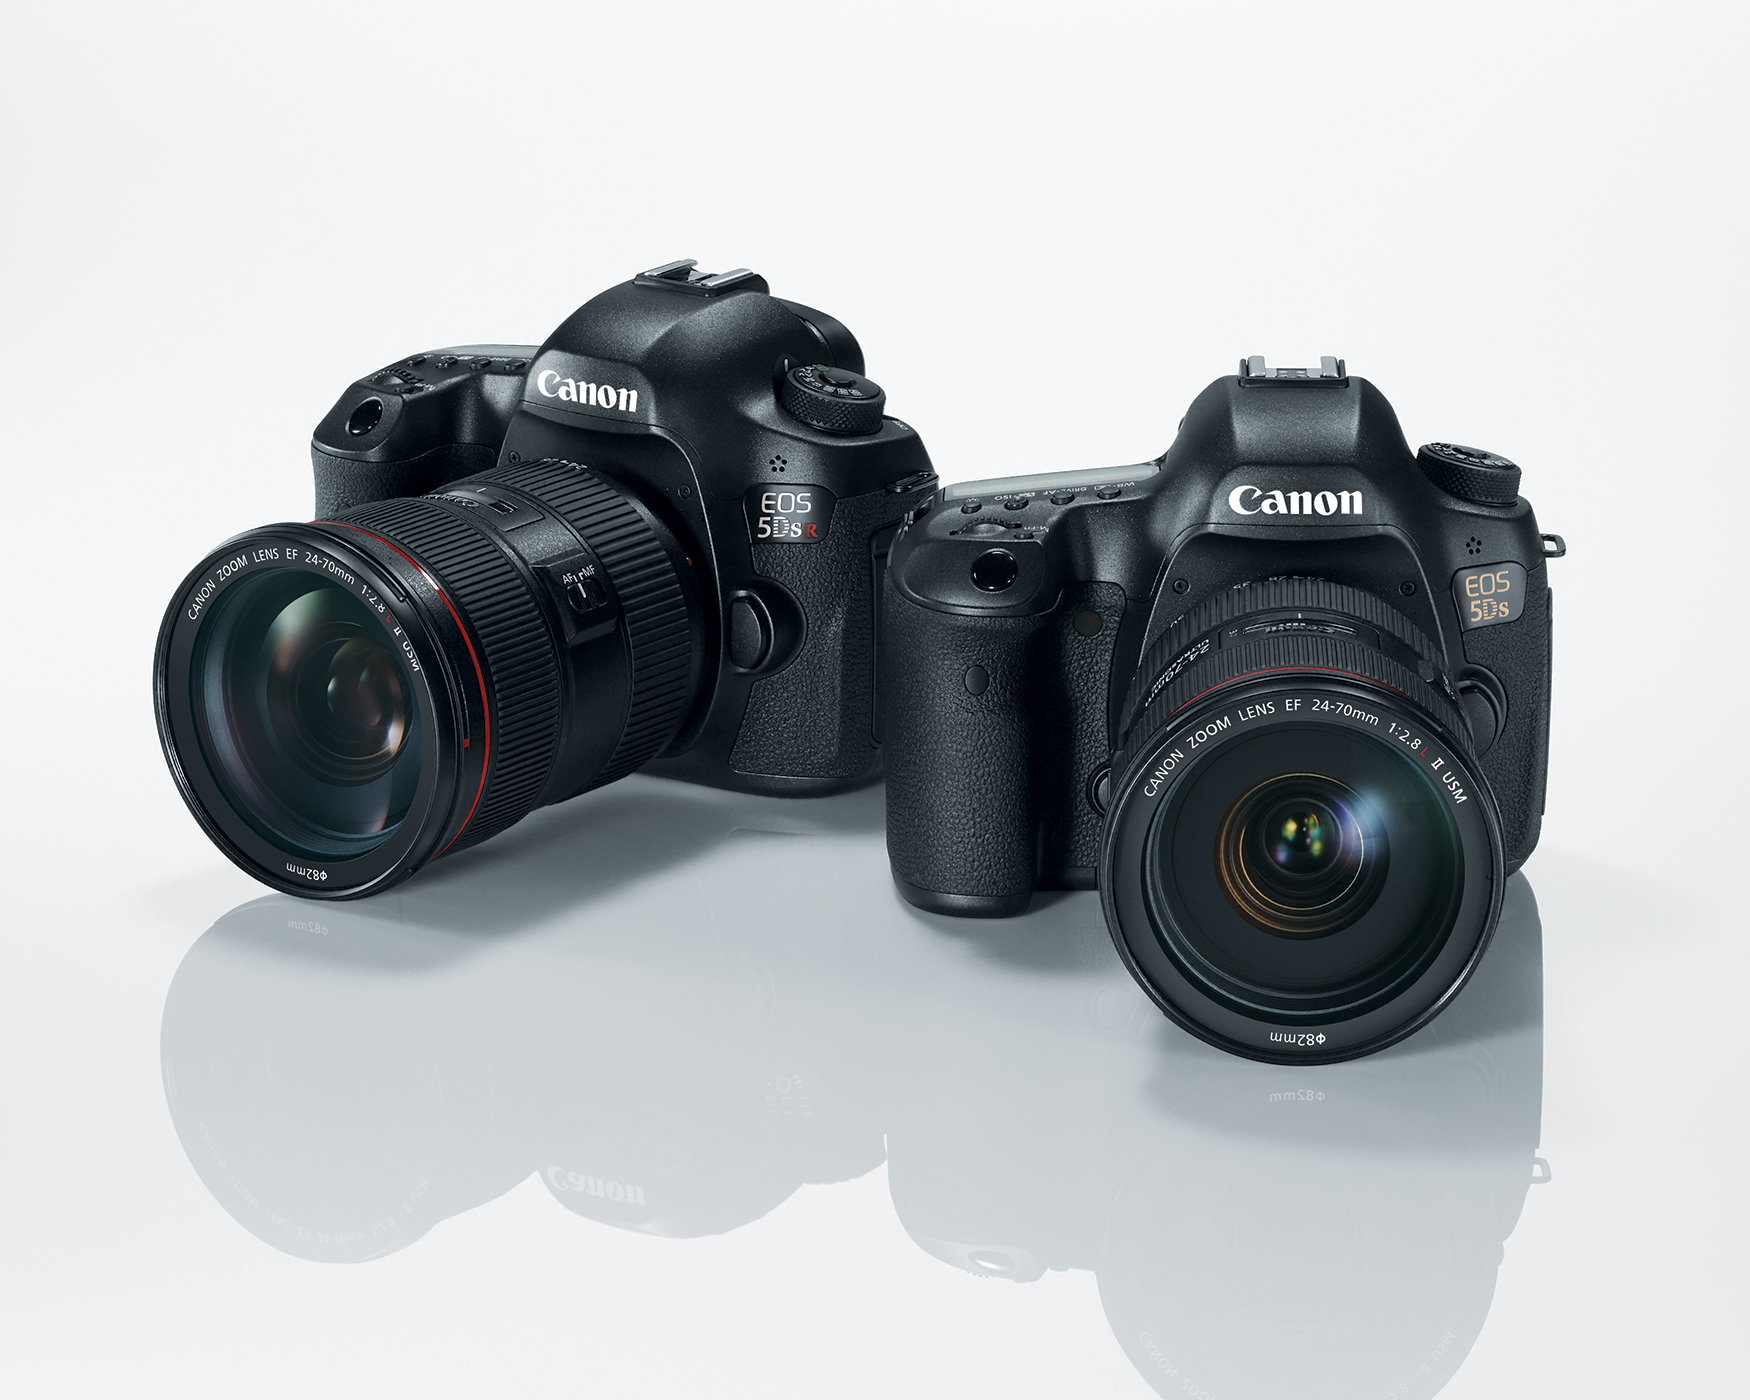 The Canon 5DS & 5DS R are 50.6 Megapixel Full-Frame Monsters